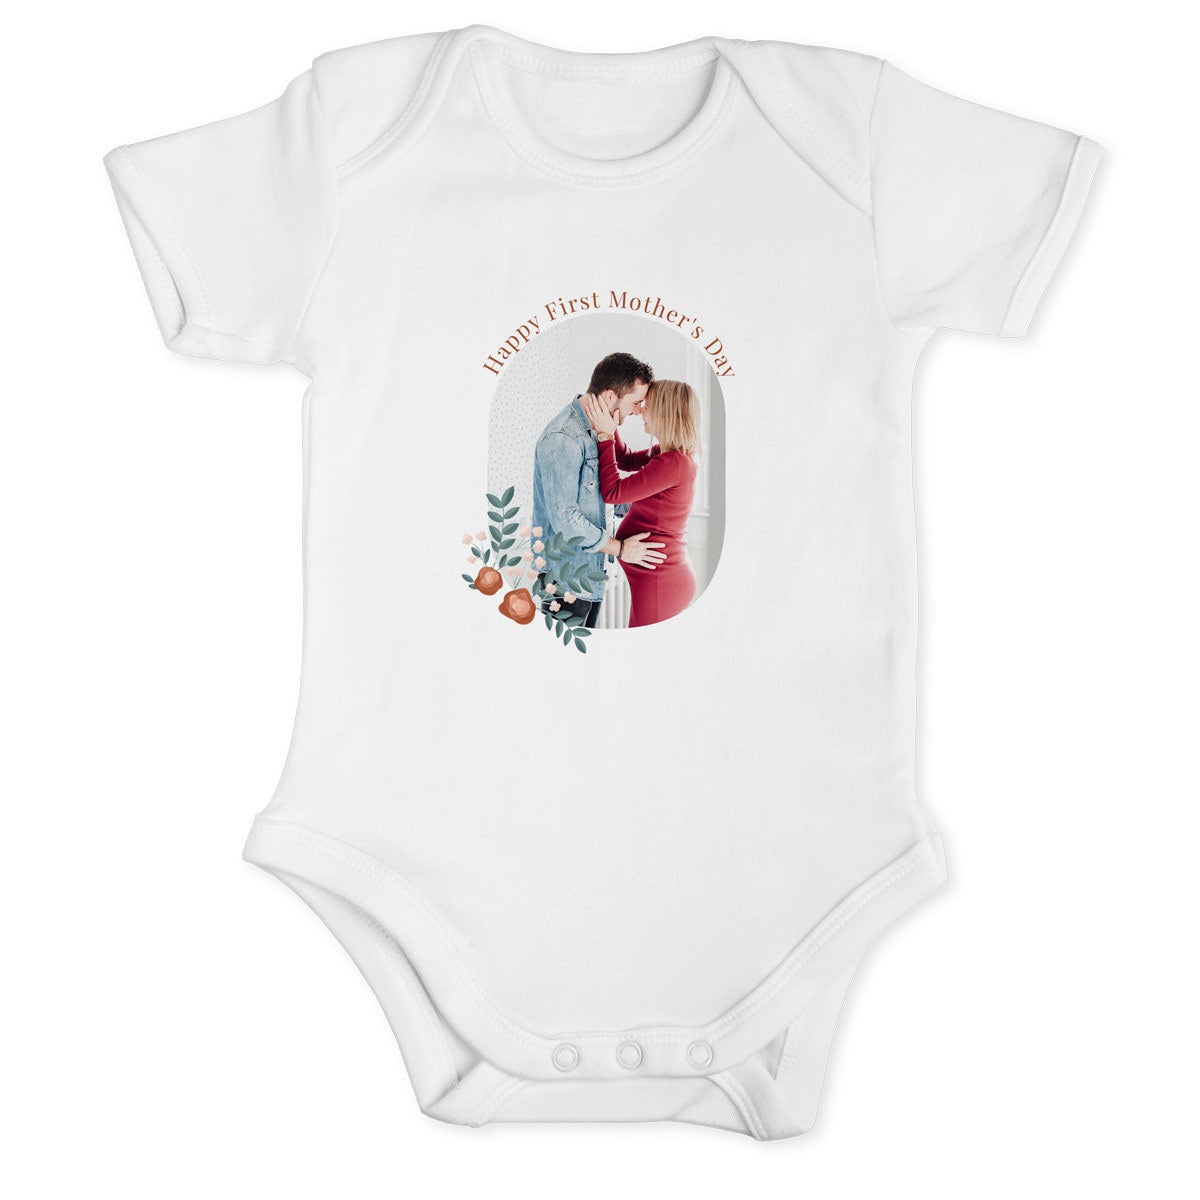 Personalised baby babygrow - My first Mother's Day - White - 62/68